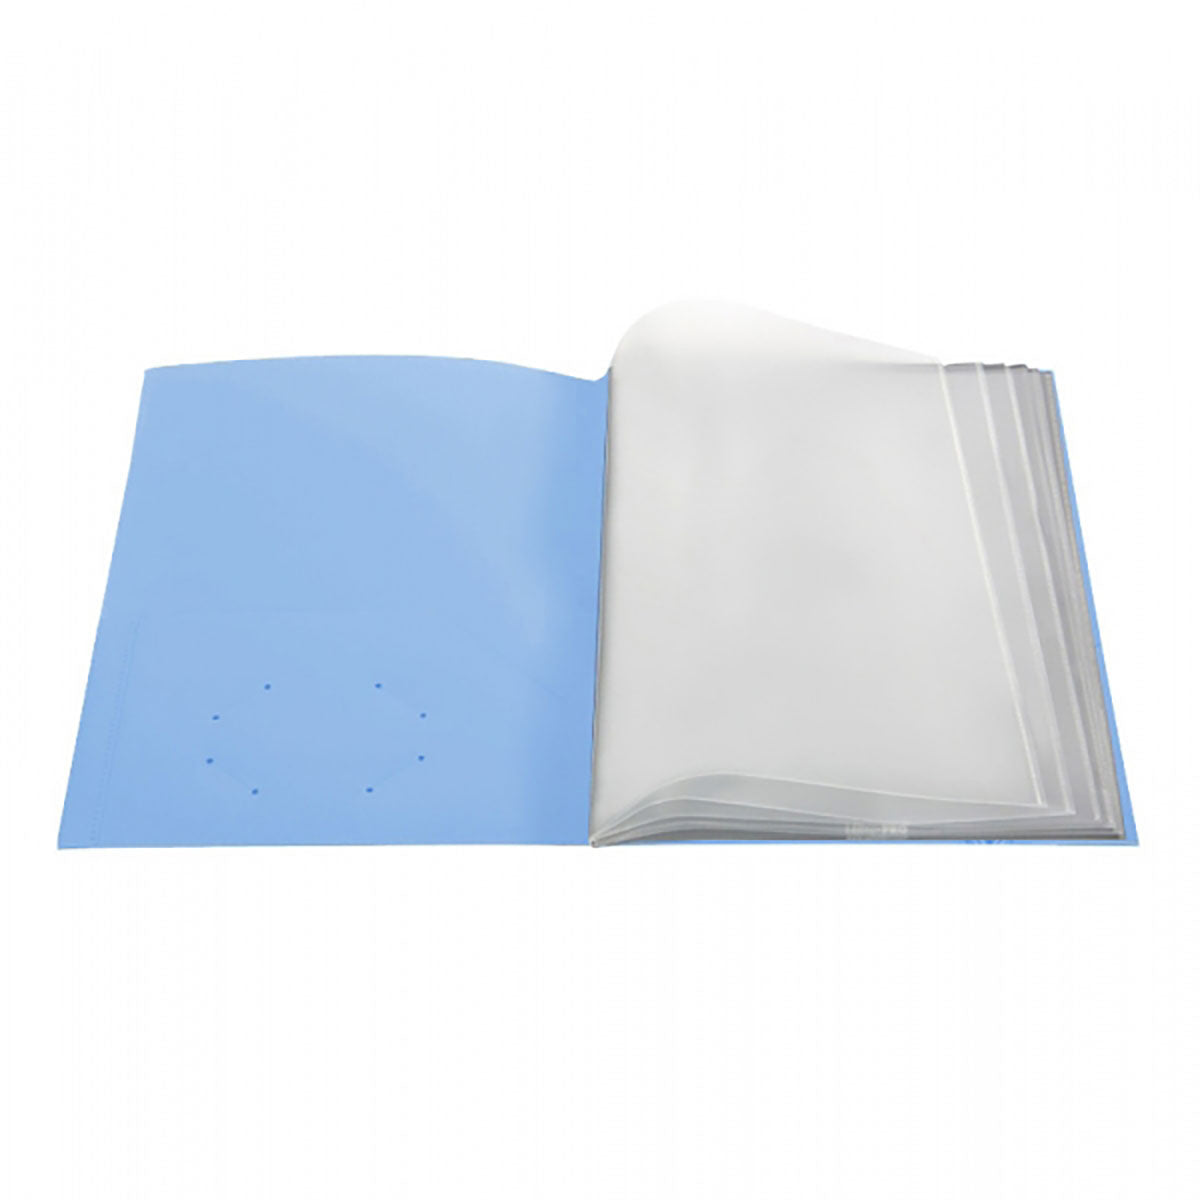 Customized Pocket Folder With Clear Outside Pockets And 6 Pages | Ultra Folders